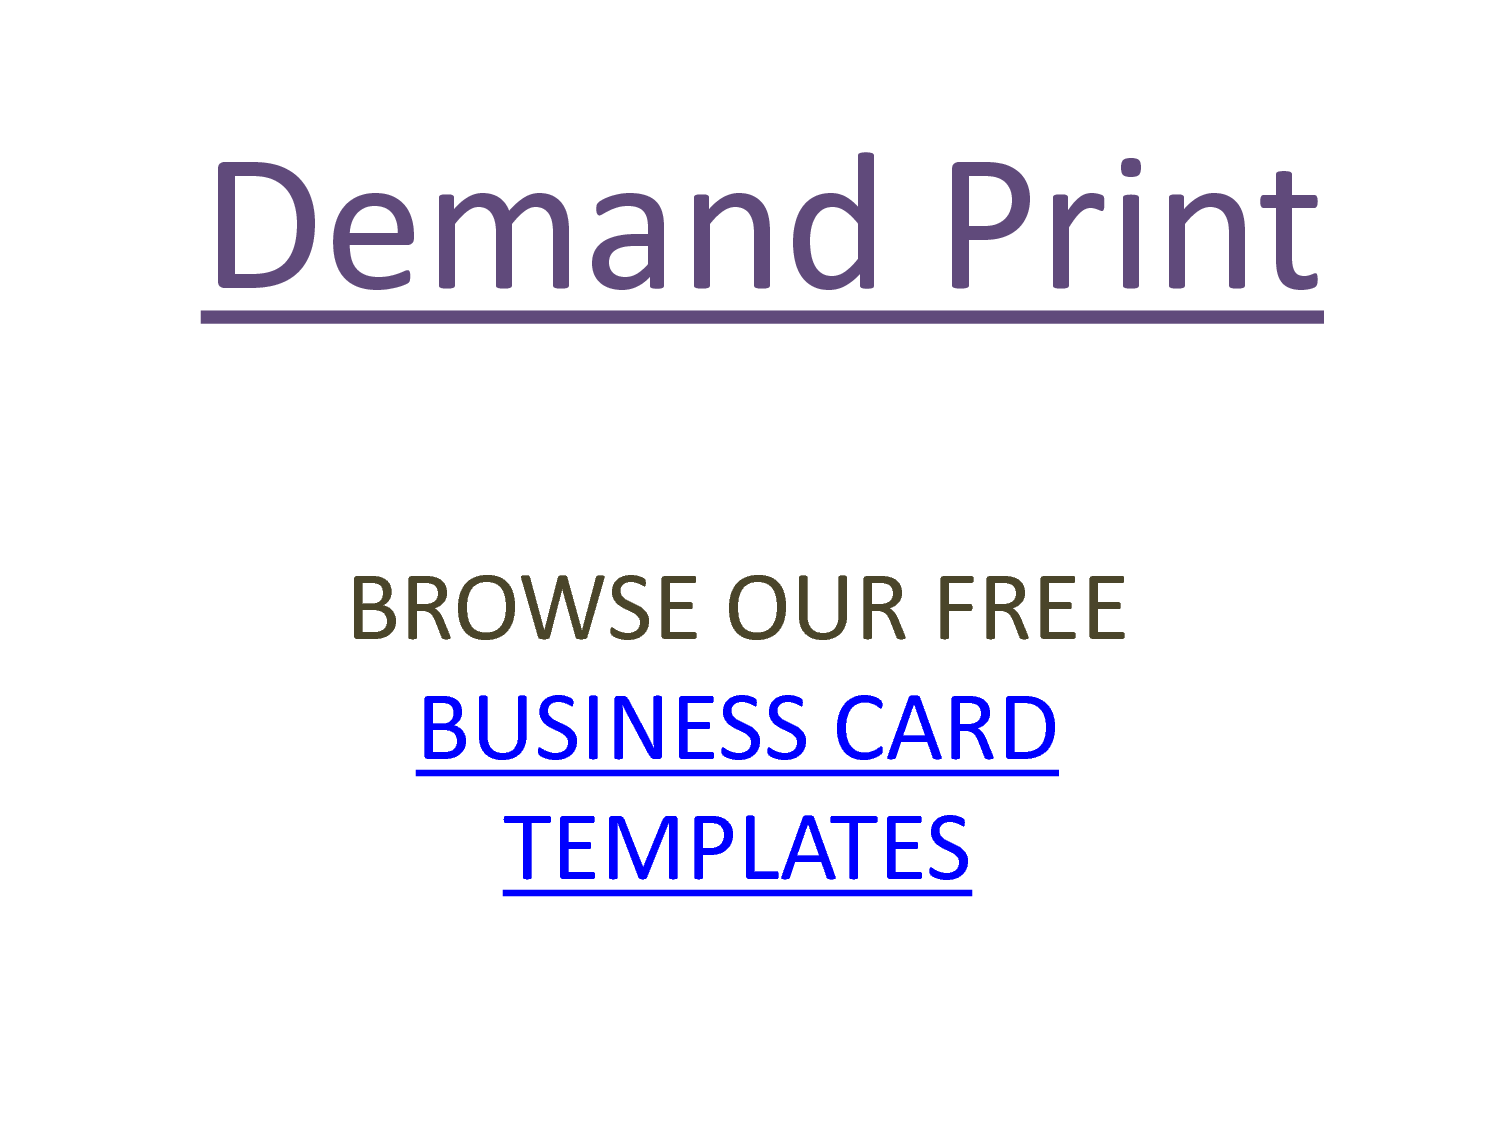 21 Free PowerPoint Designs Business Card Images - PowerPoint Free Within Christian Business Cards Templates Free